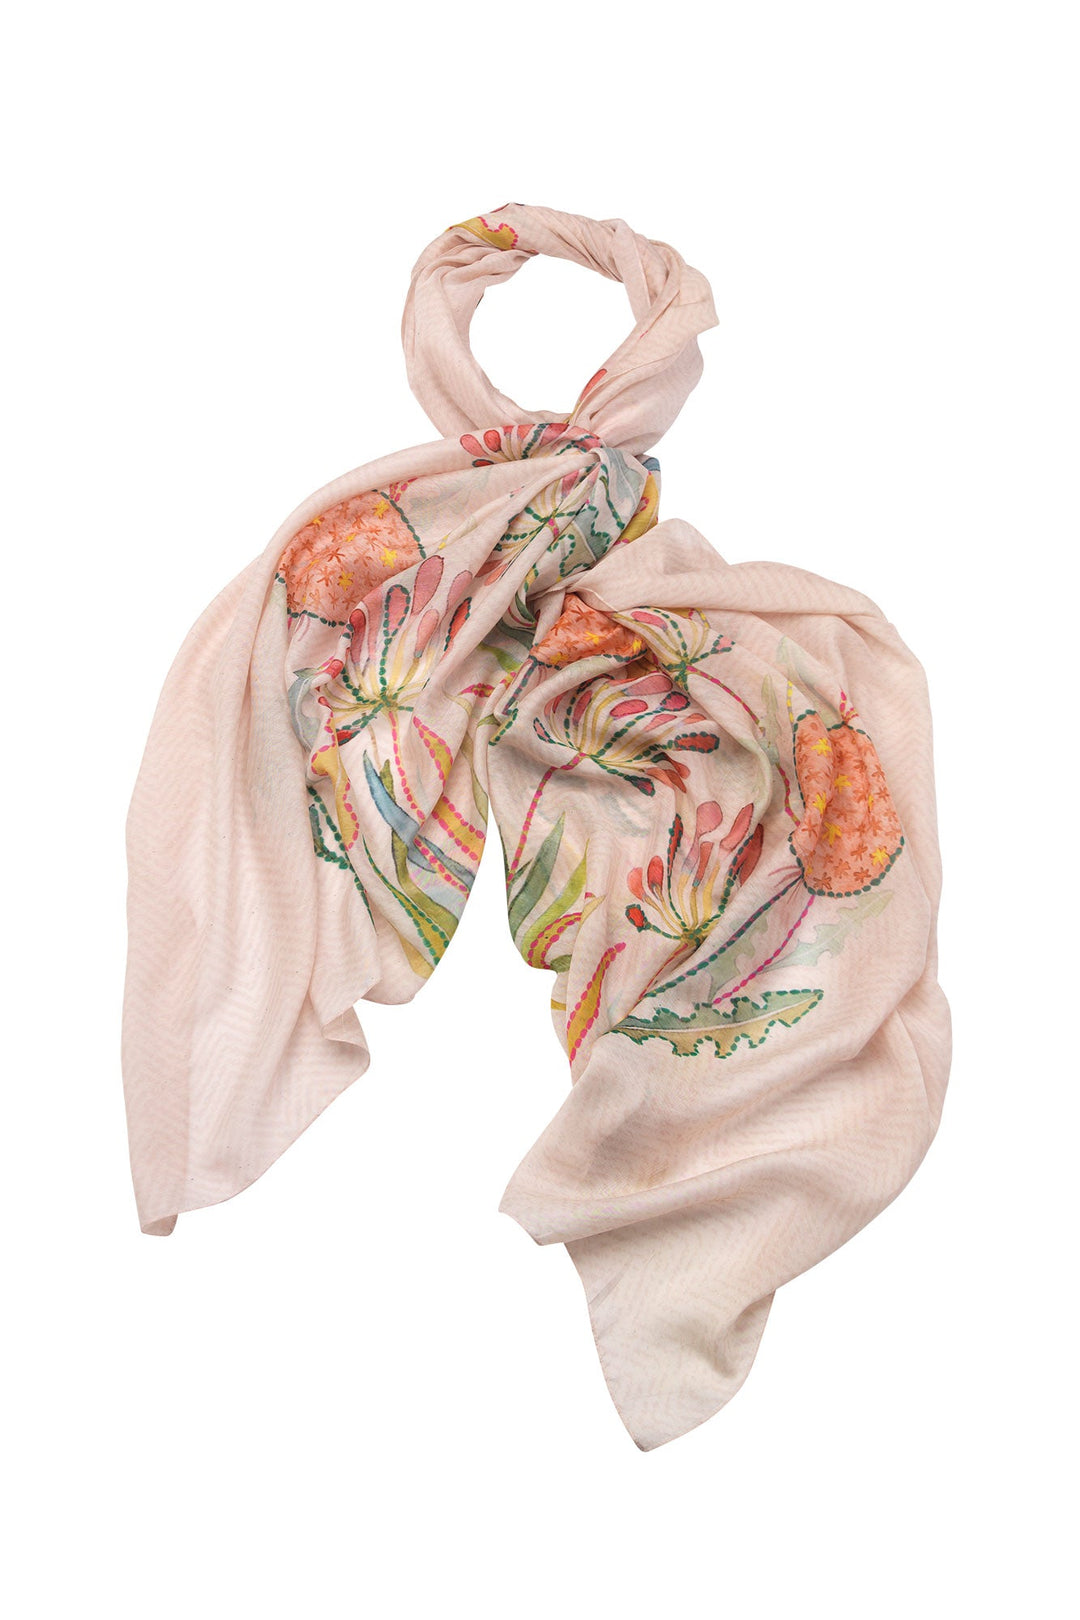 Women's accessories, gifts for her. Large scarf in pink yellow orange pop flowers print by One Hundred Stars